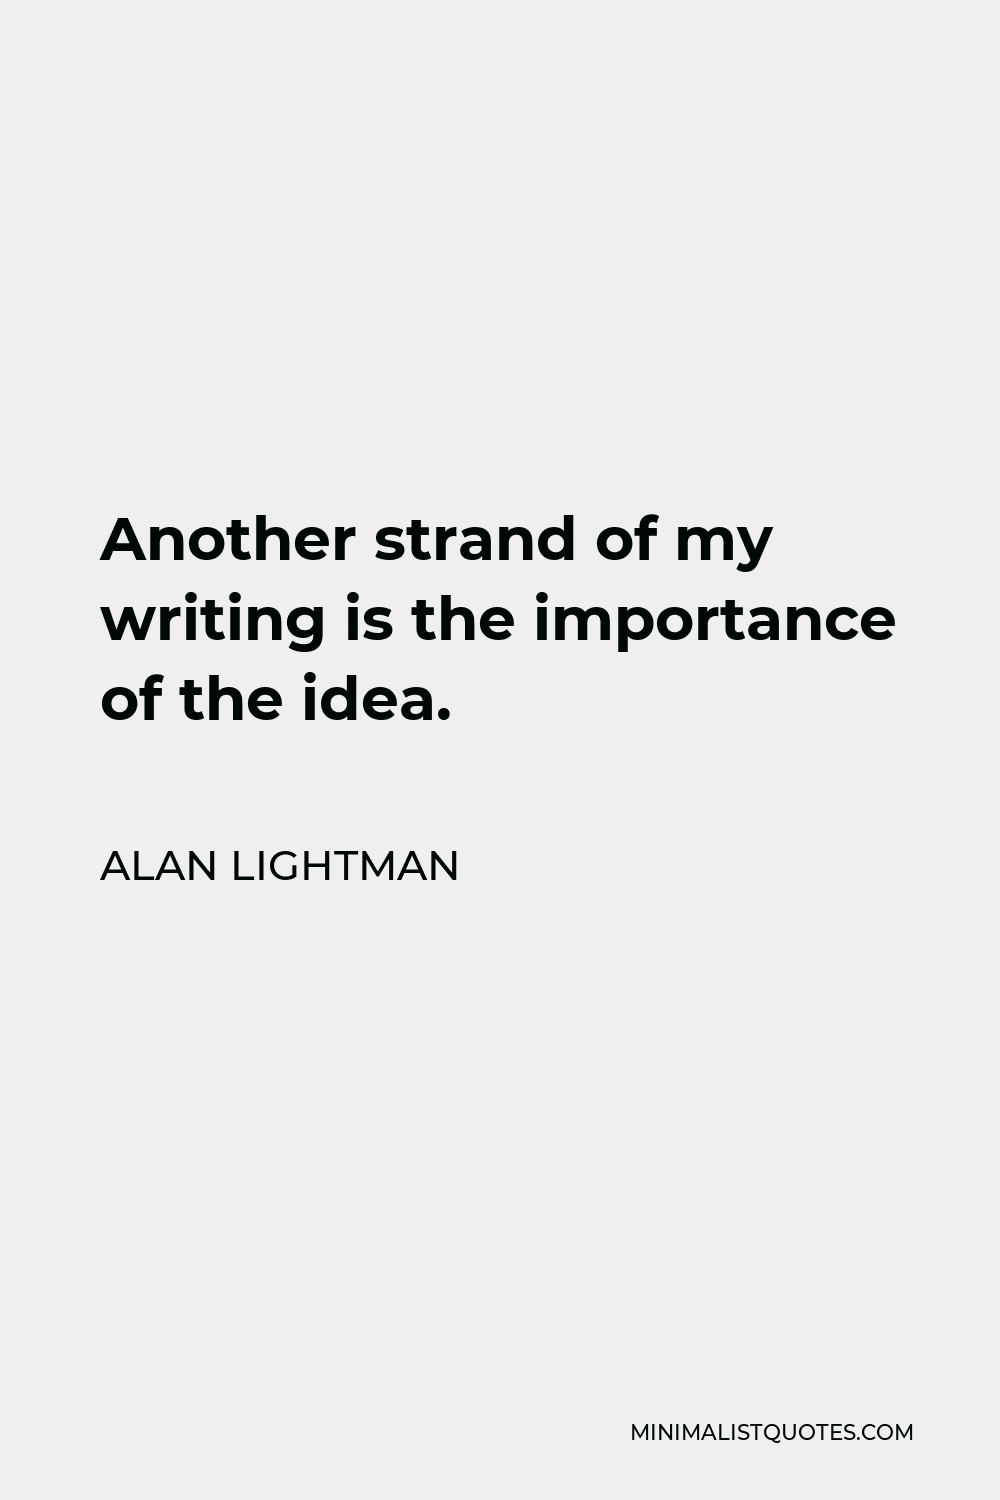 Alan Lightman Quote - Another strand of my writing is the importance of the idea.